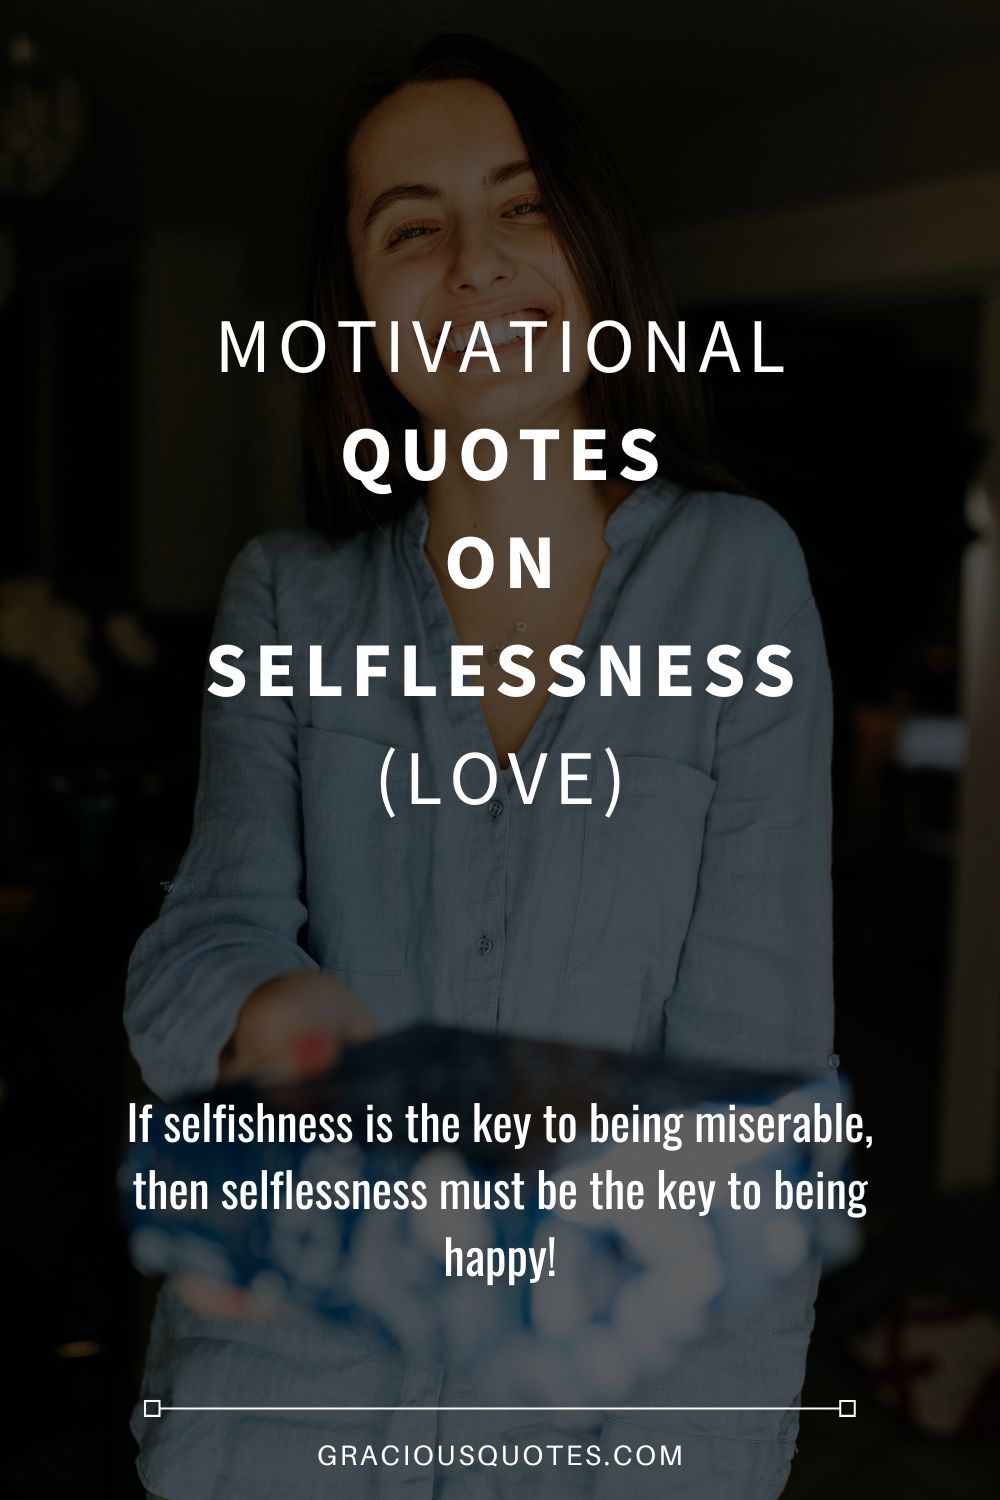 Motivational Quotes on Selflessness (LOVE) - Gracious Quotes